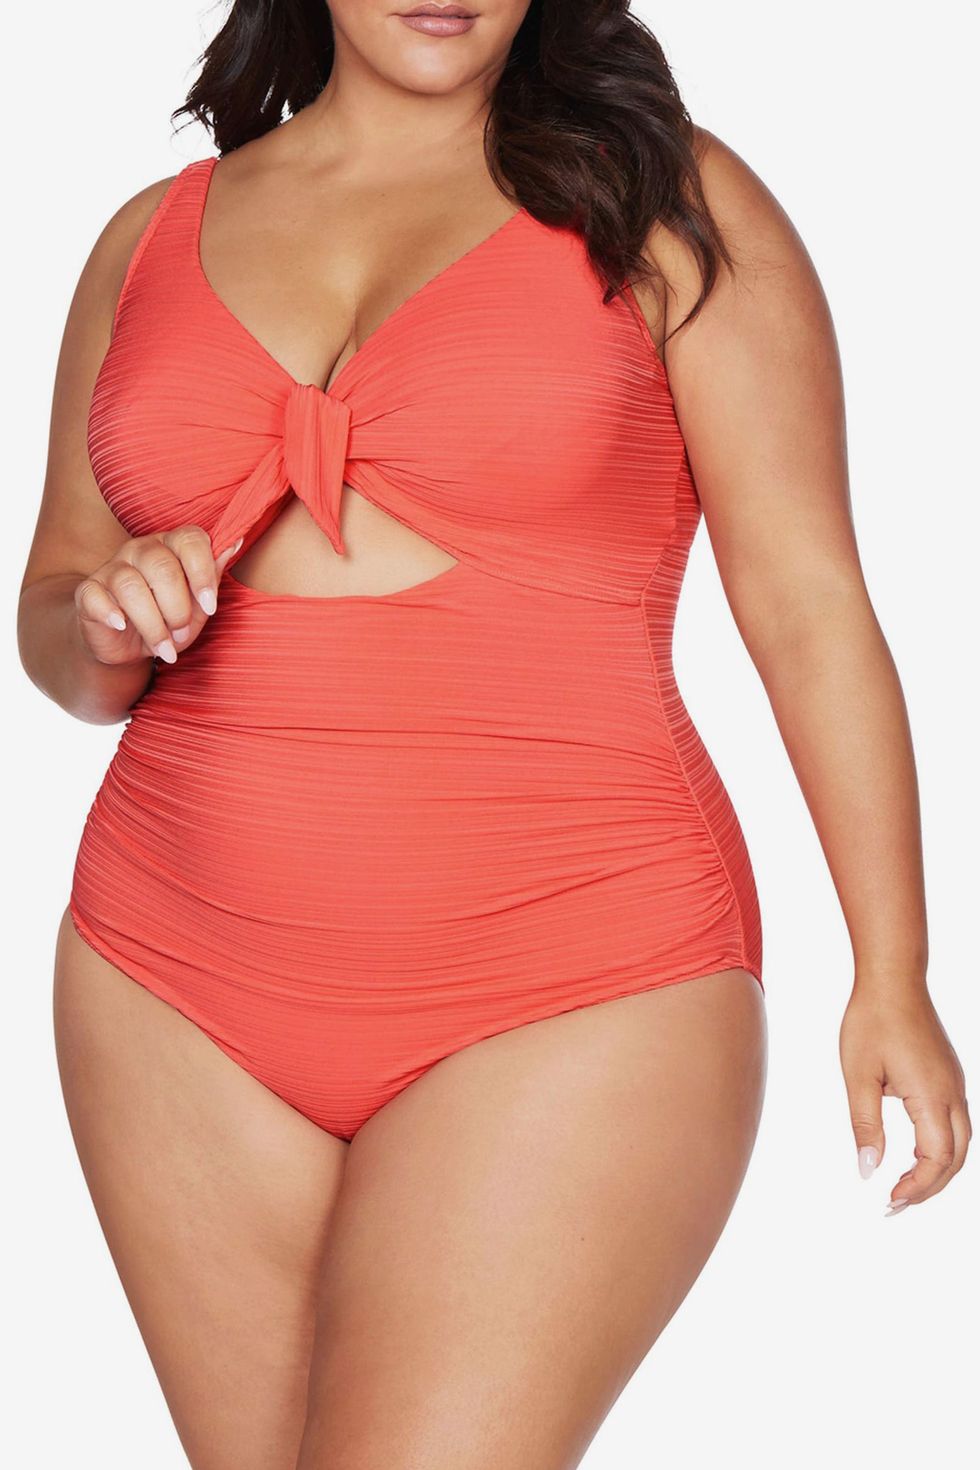 A Swimsuit Perfect for ME — Queen Size Magazine